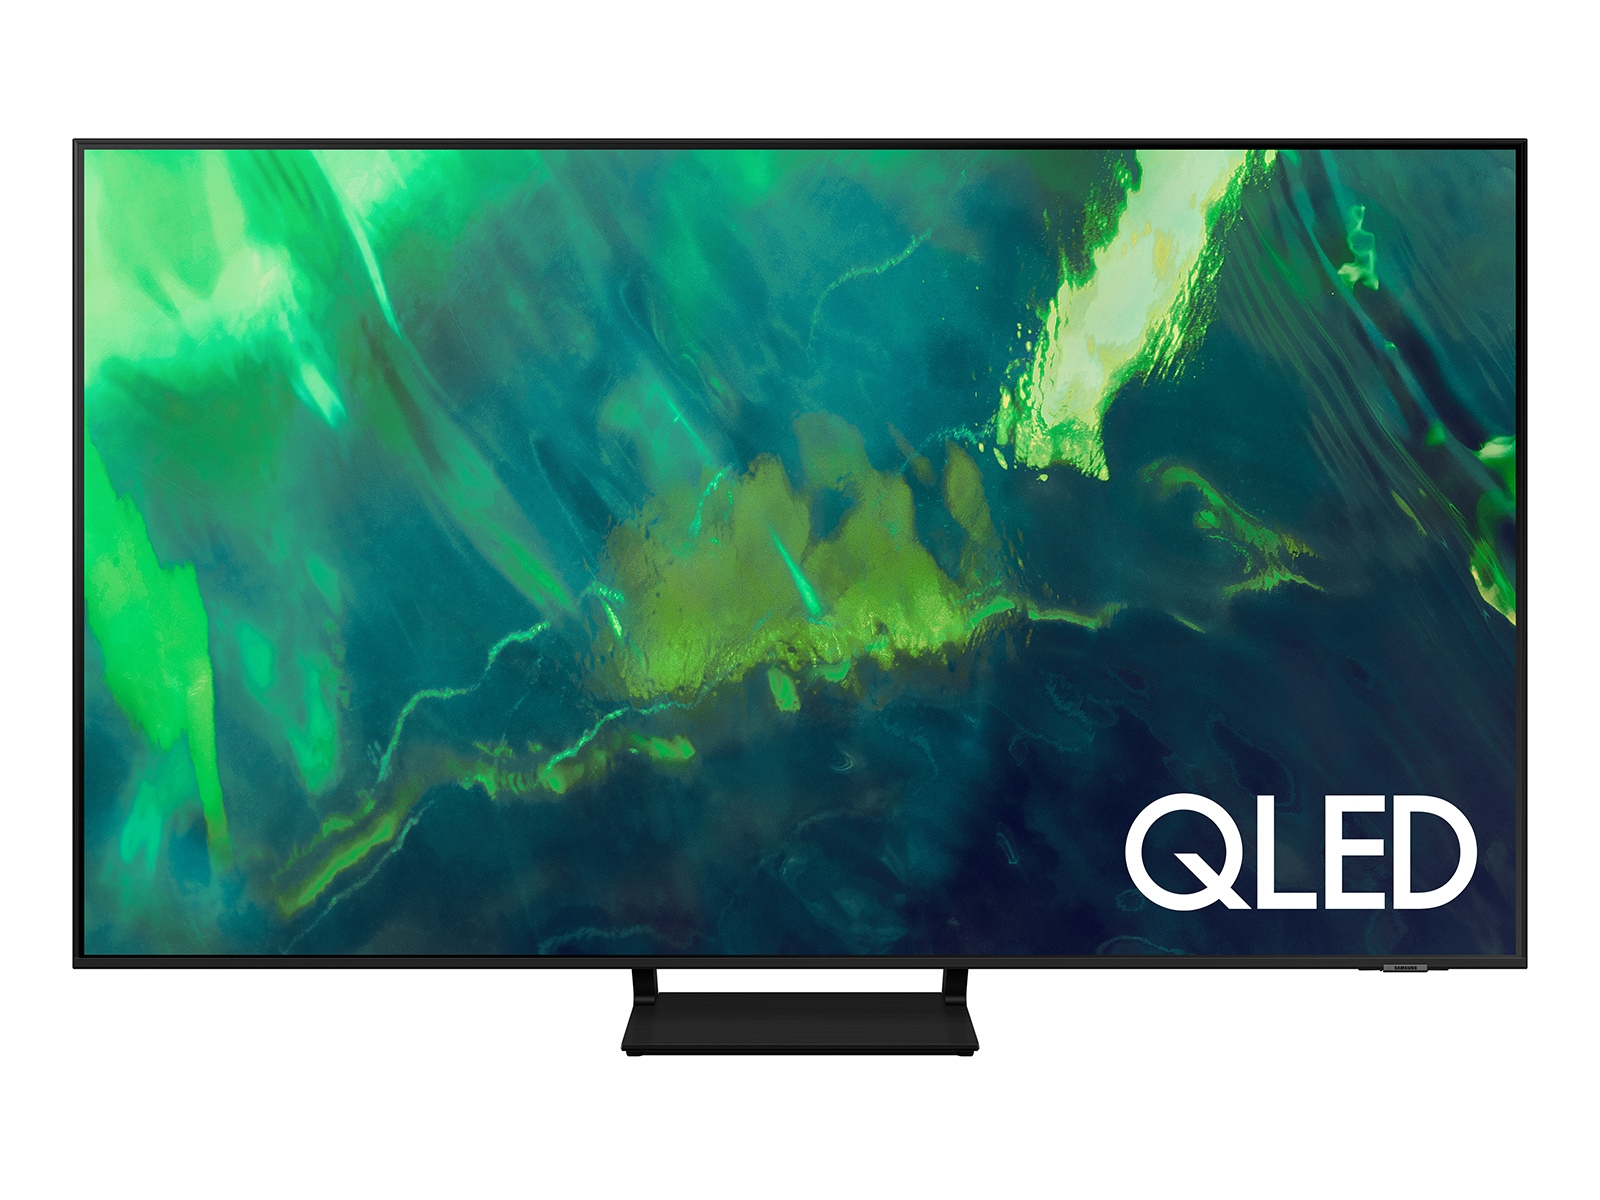 Samsung Q70A 75-Inch 4K QLED TV (2021) With Quantum Processor 4K | Samsung US $1359.99 with workperks discount